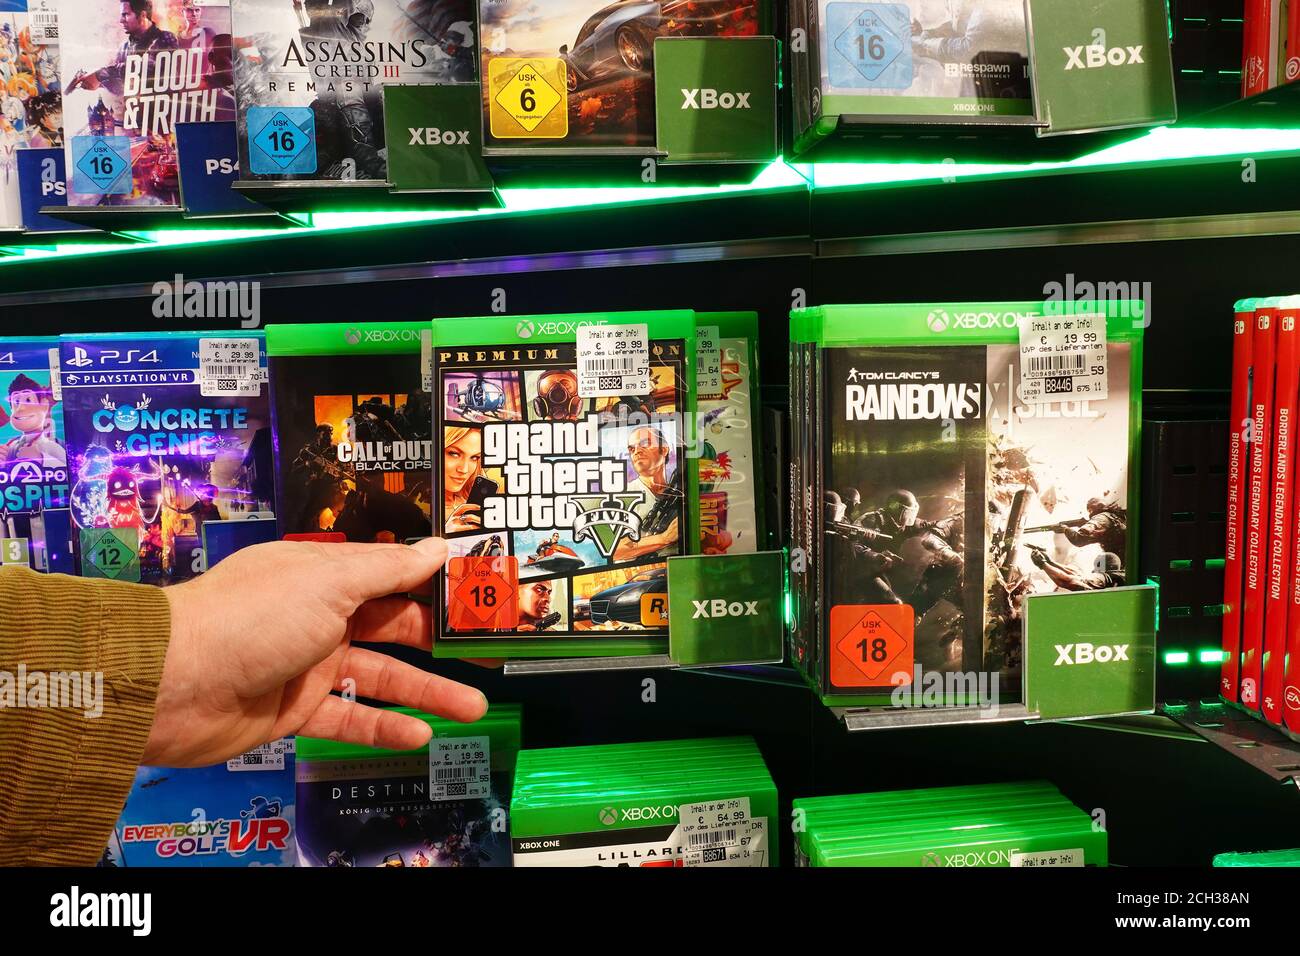 GTA, Grand Theft Auto V, Xbox one game in a shop. Stock Photo